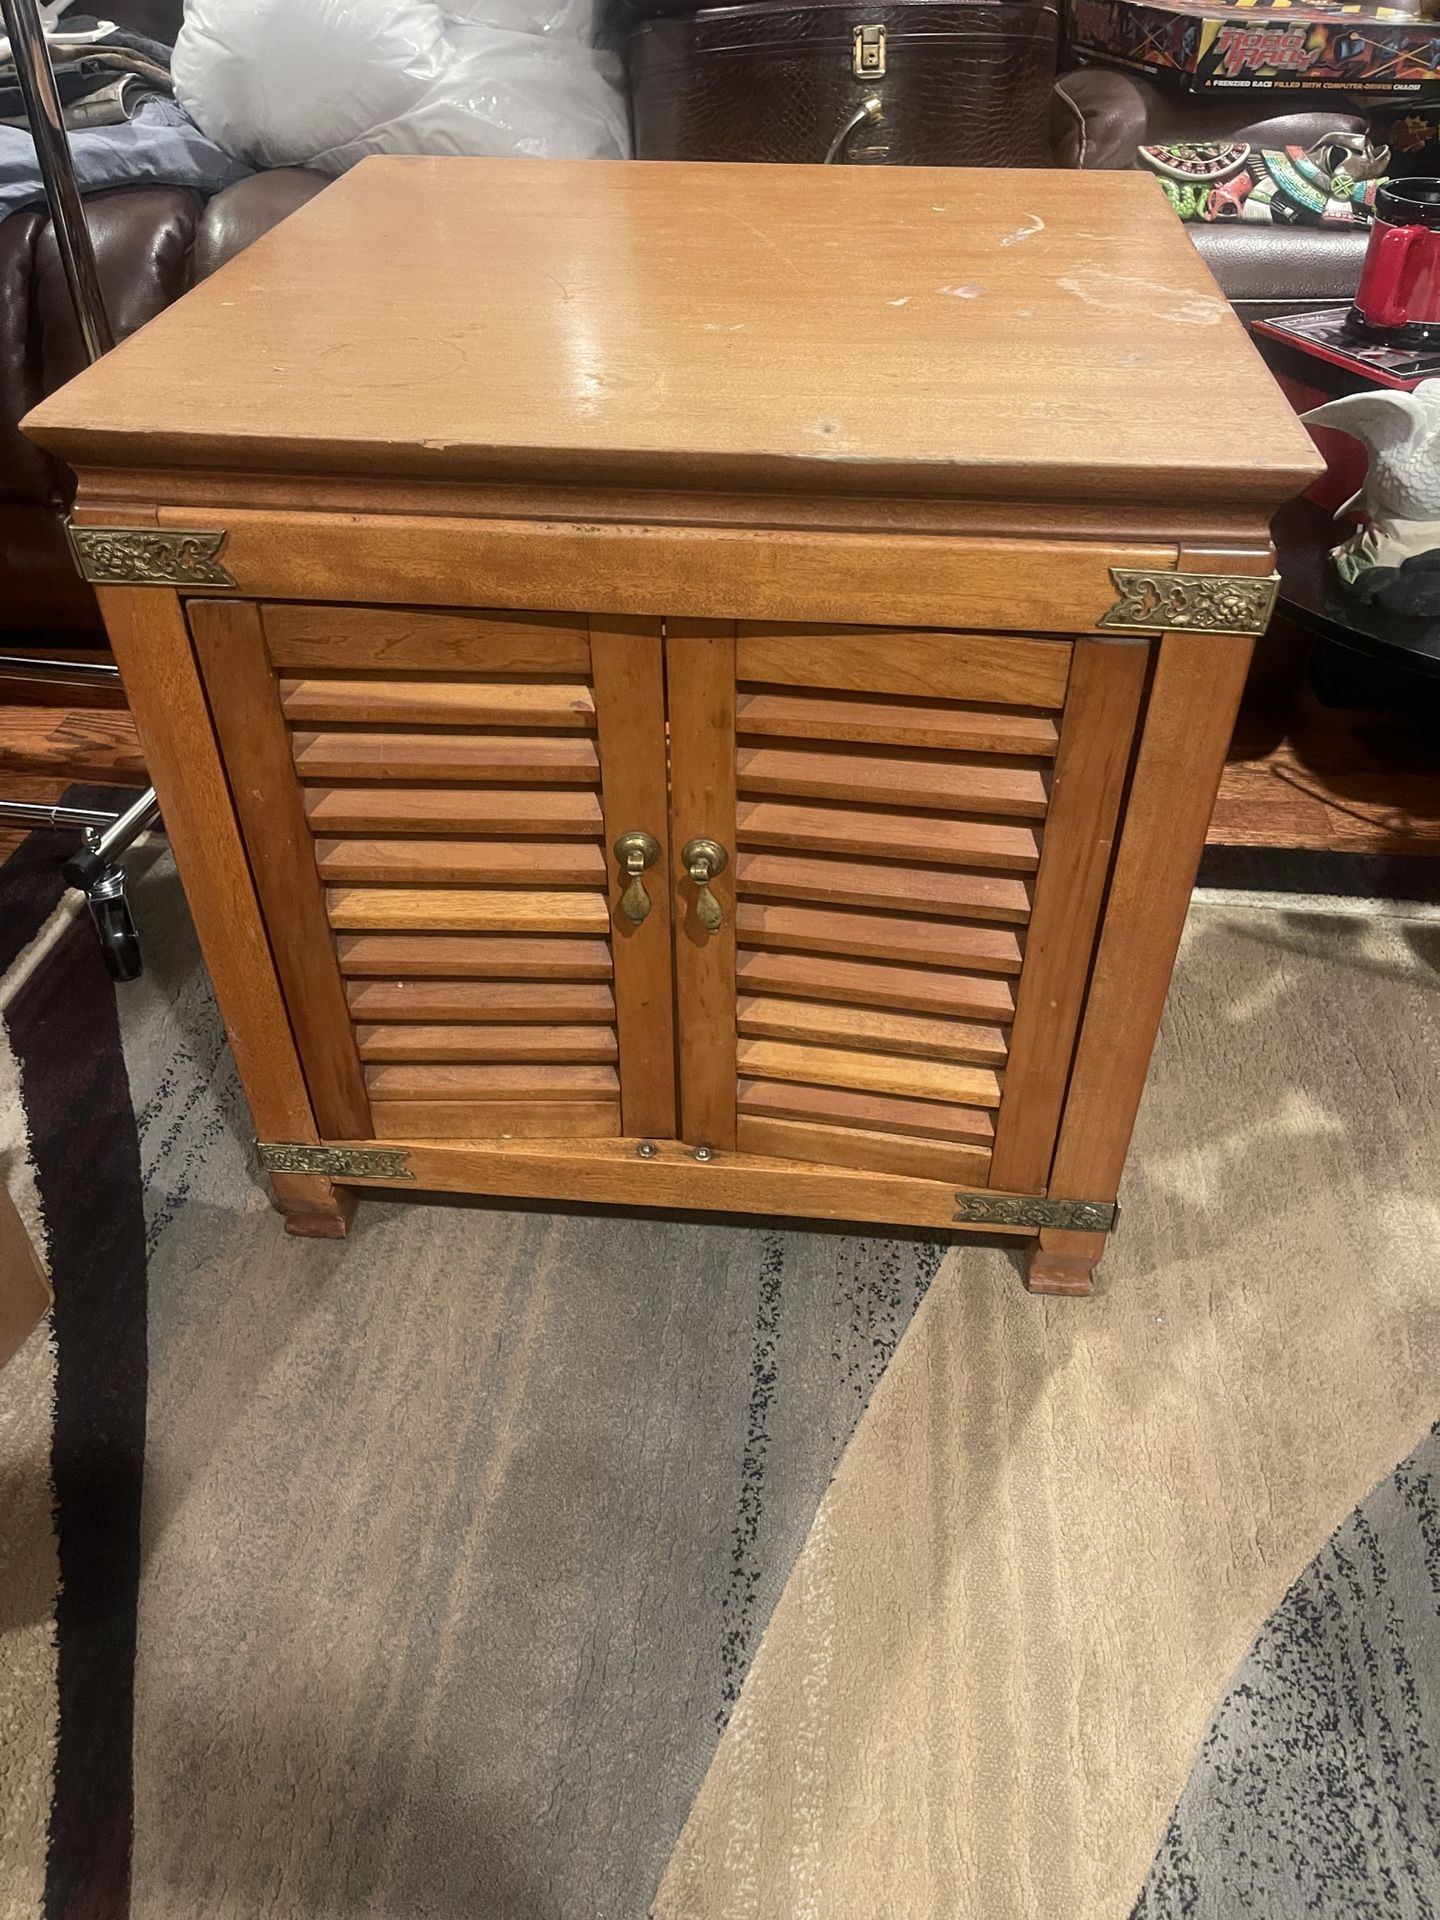 Vintage 1970’s Side Wood Cabinet In Very Good Condition, Just Need To Refinish Top